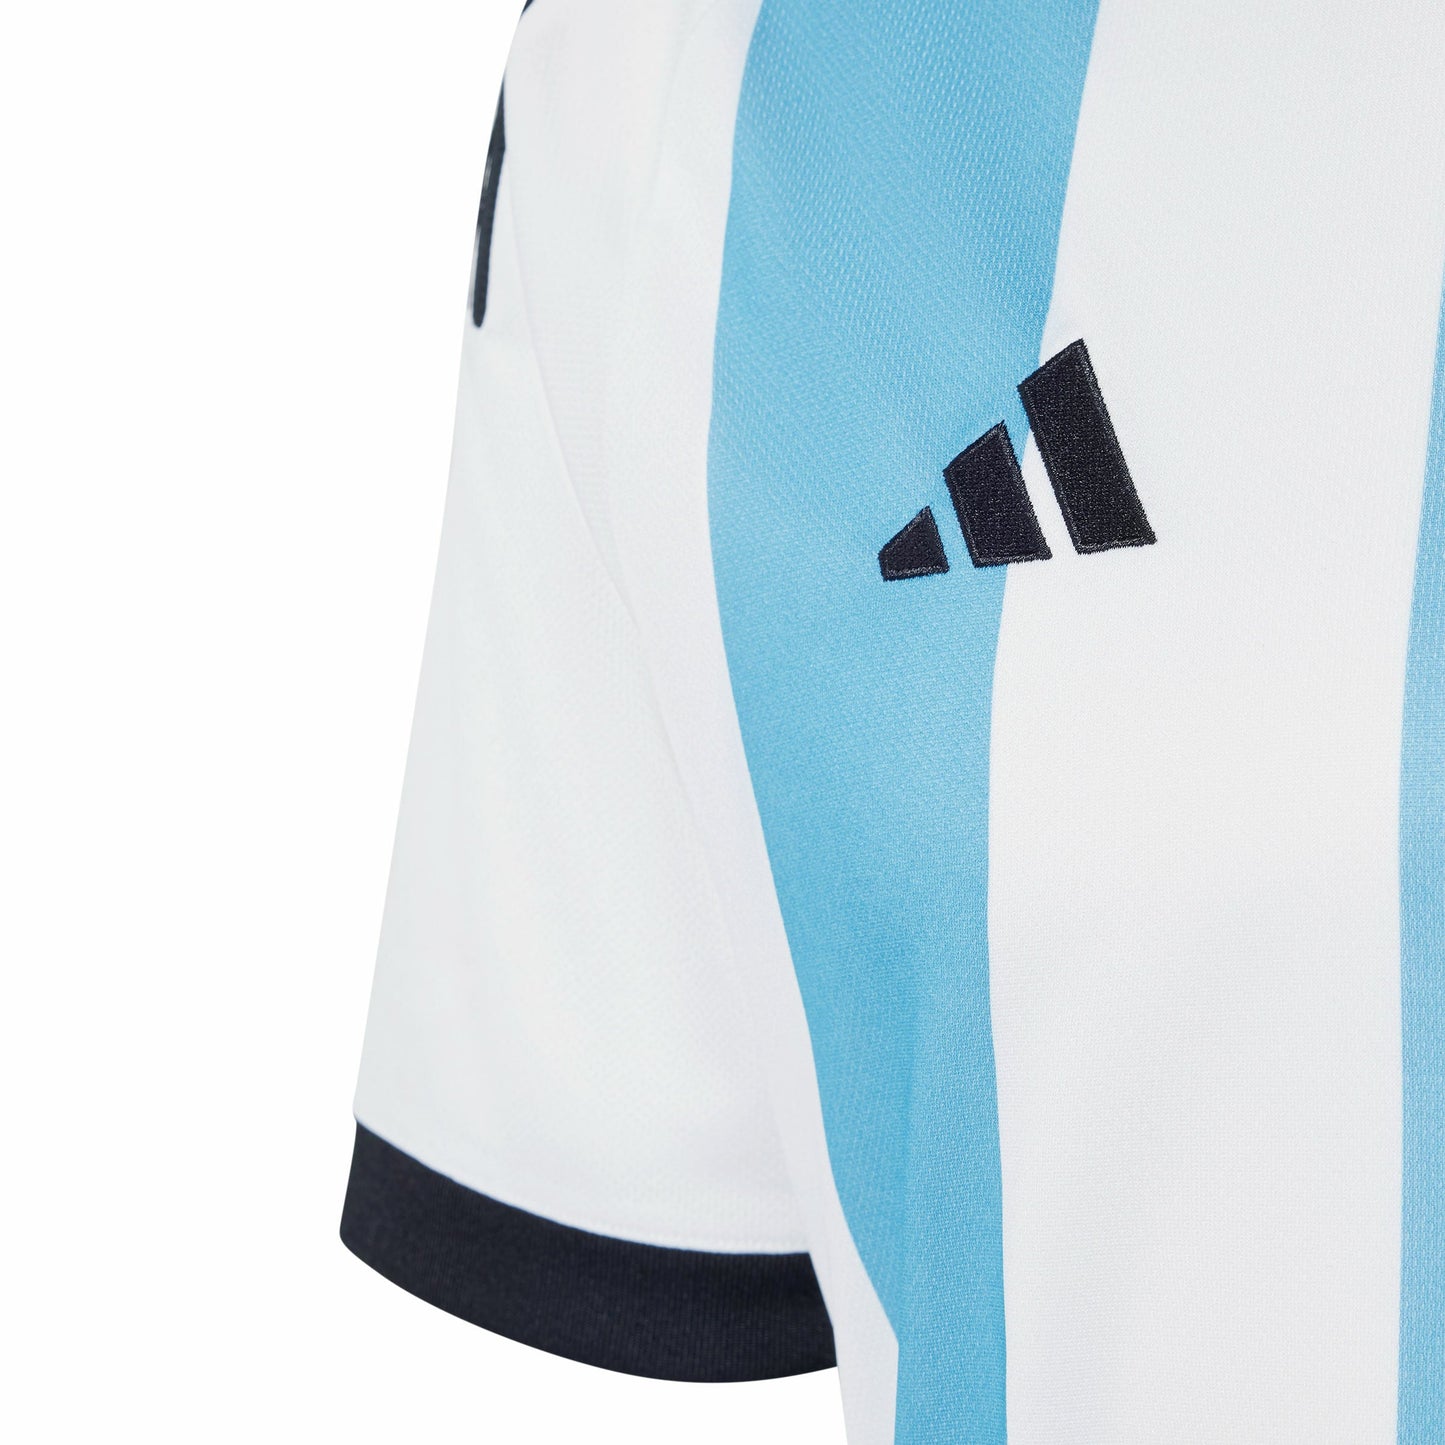 Argentina 2022-23 World Cup Home Kit - Includes Shirt, Shorts & Socks (3 Stars)